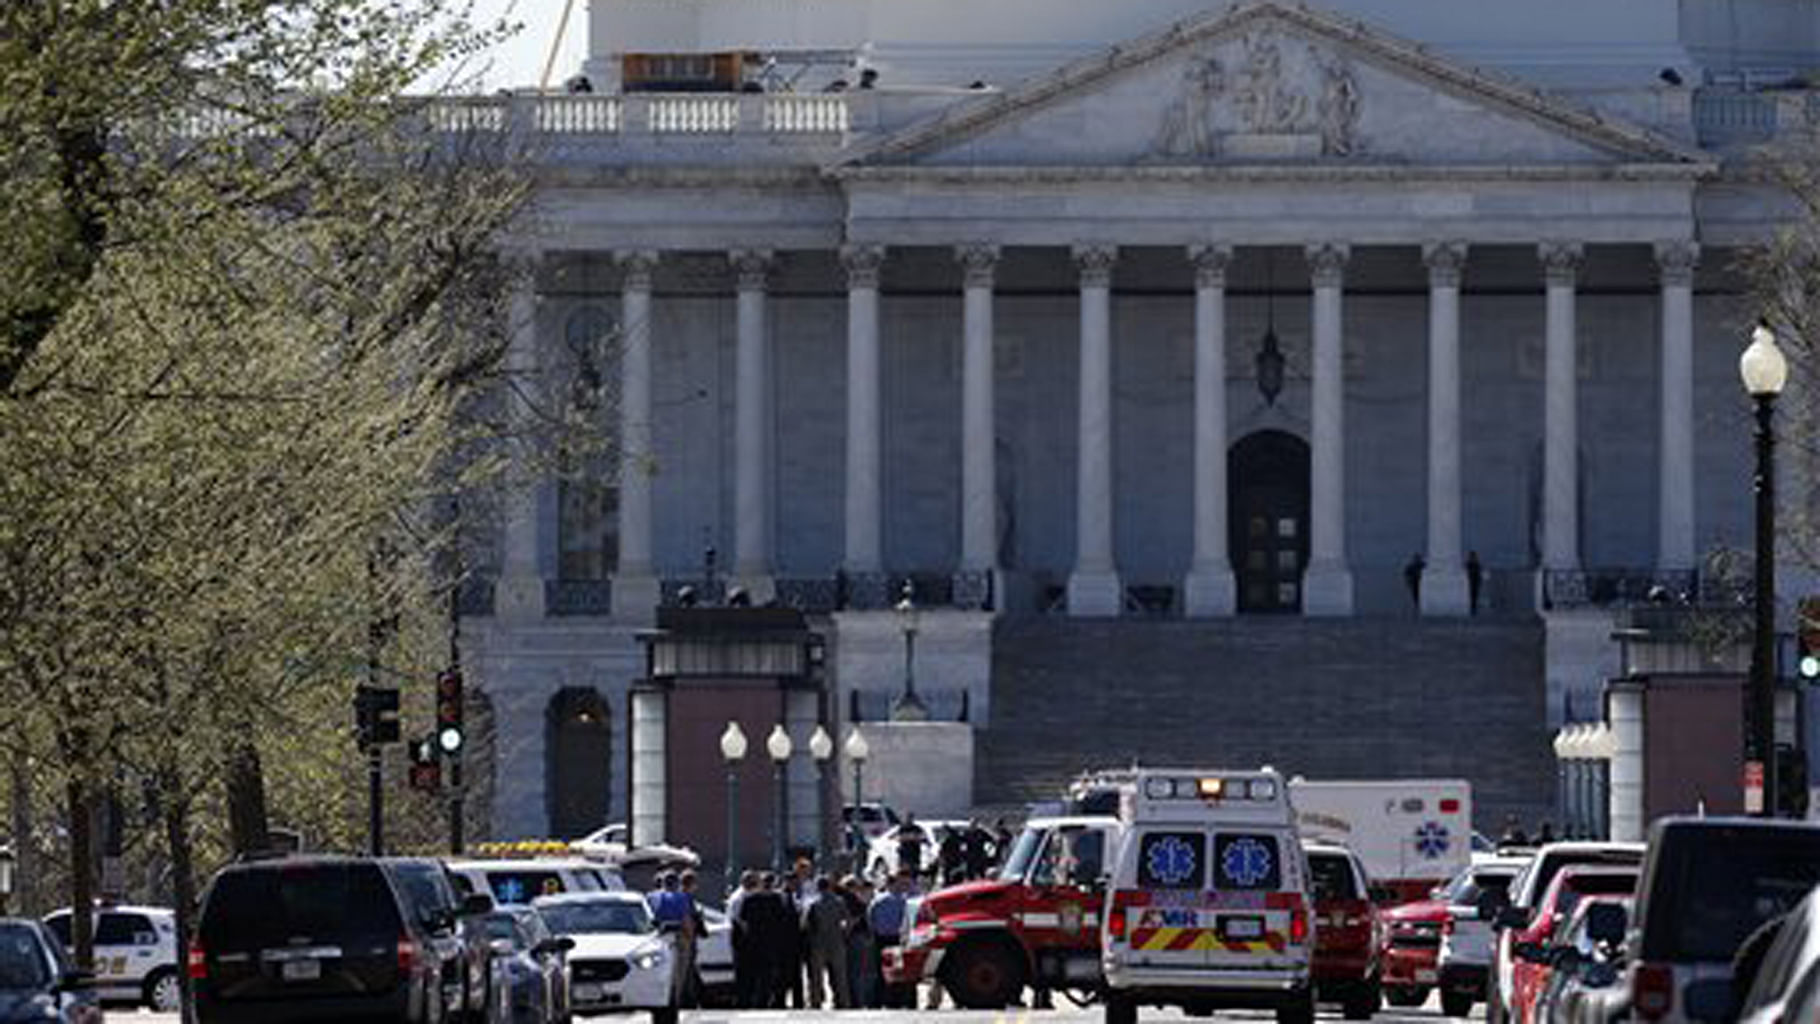 Law Enforcement and rescue vehicles are seen on Capitol Hill in Washington, Monday, March 28, 2016, after a U.S. Capitol Police officer was shot at the Capitol Visitor Center complex. (Photo: AP)